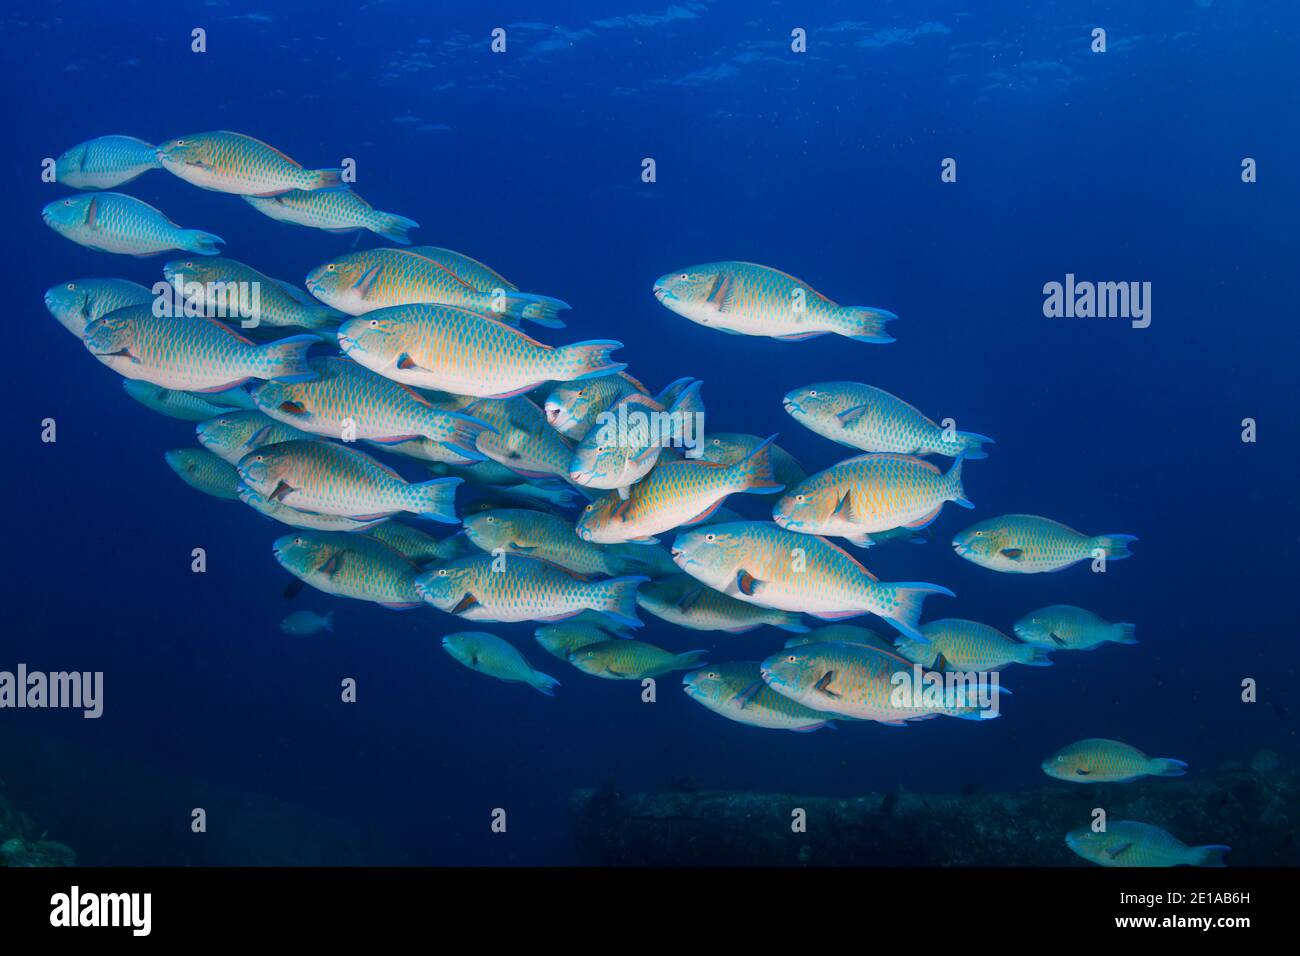 School of colourful Parrotfish on a tropical reef in Thailand's Andaman Sea Stock Photo